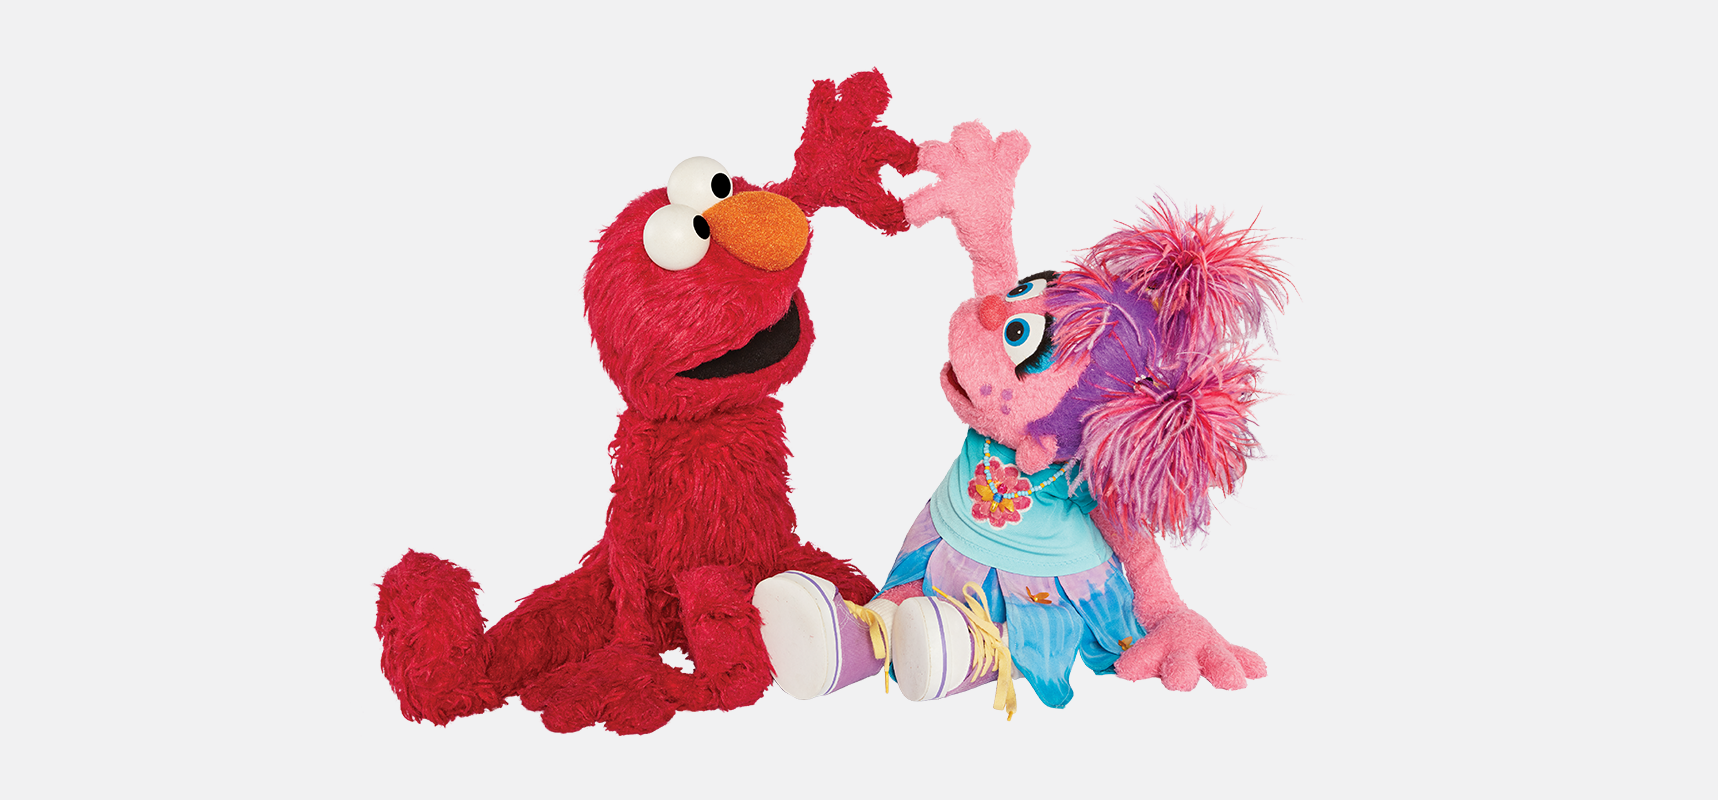 Elmo and Abby making a heart with their hands.